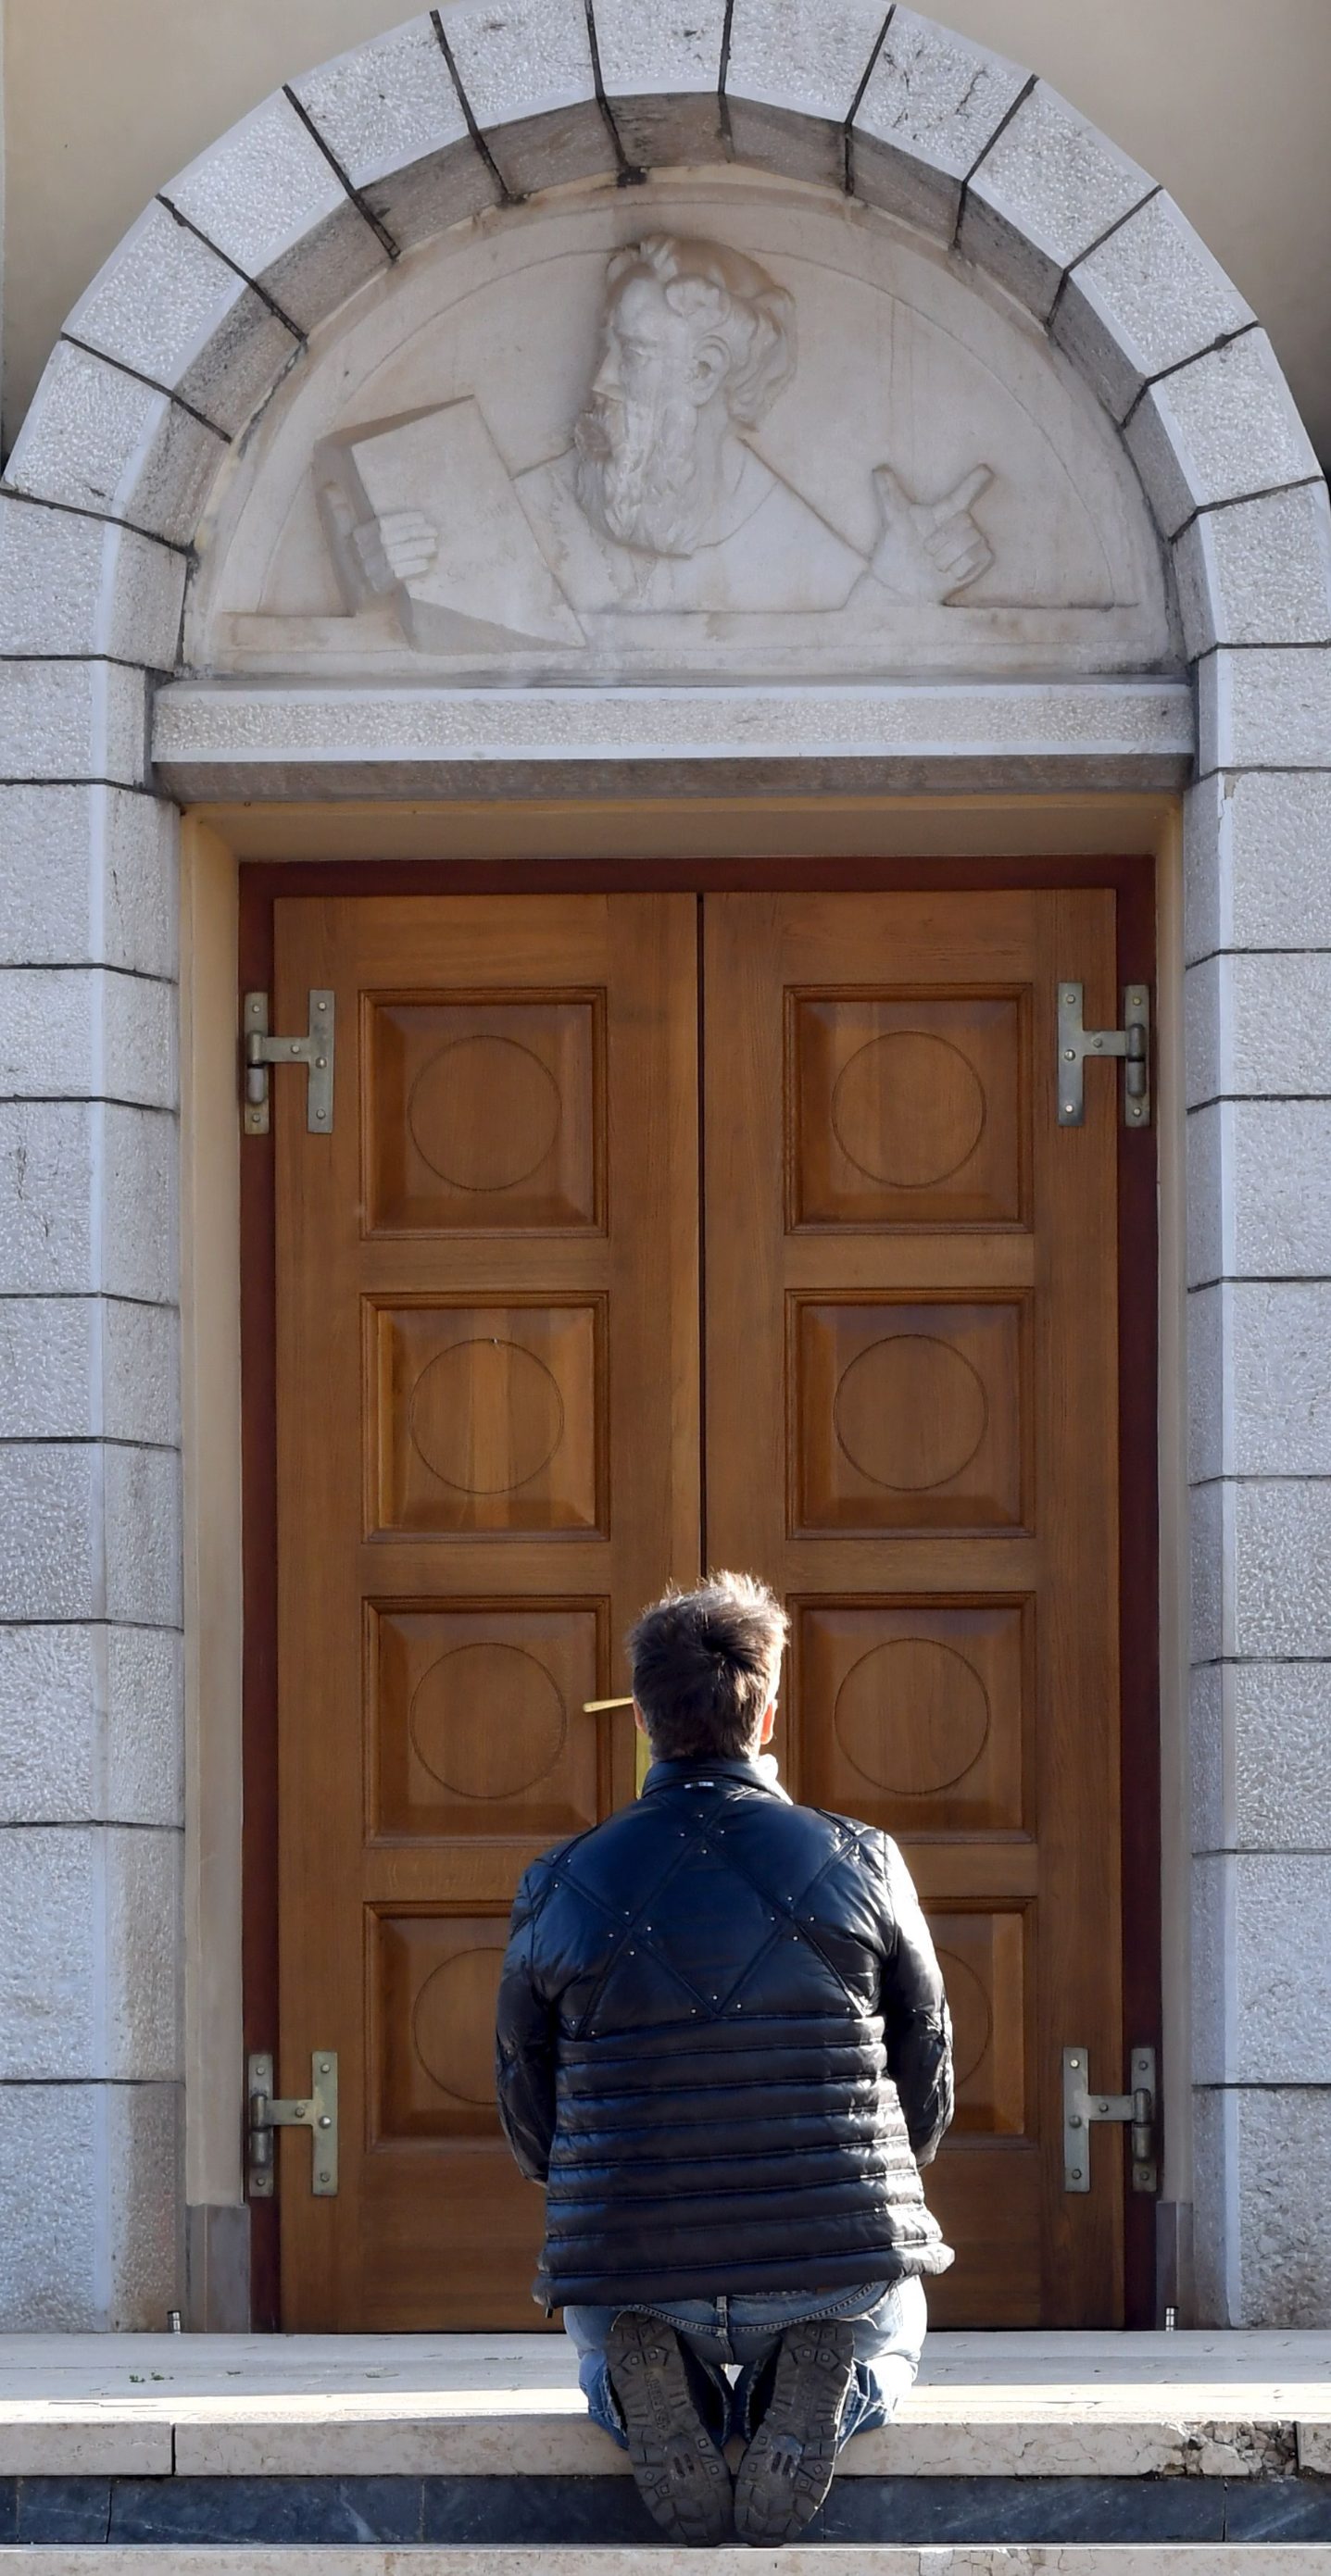 A man prays alone on the doorstep of the St Jacob church, usually riddled with thousands of Catholic believers, at Marian pilgrimage site, in the southern Bosnian town of Medjugorje, on April 7, 2020 during a lockdown to stop the spread of COVID-19 (novel coronavirus). - Ever since the Virgin Mary was said to appear before six teenagers on a hill in Bosnia four decades ago, pilgrims have flocked to the town of Medjugorje, eager to witness a miracle. (Photo by ELVIS BARUKCIC / AFP)